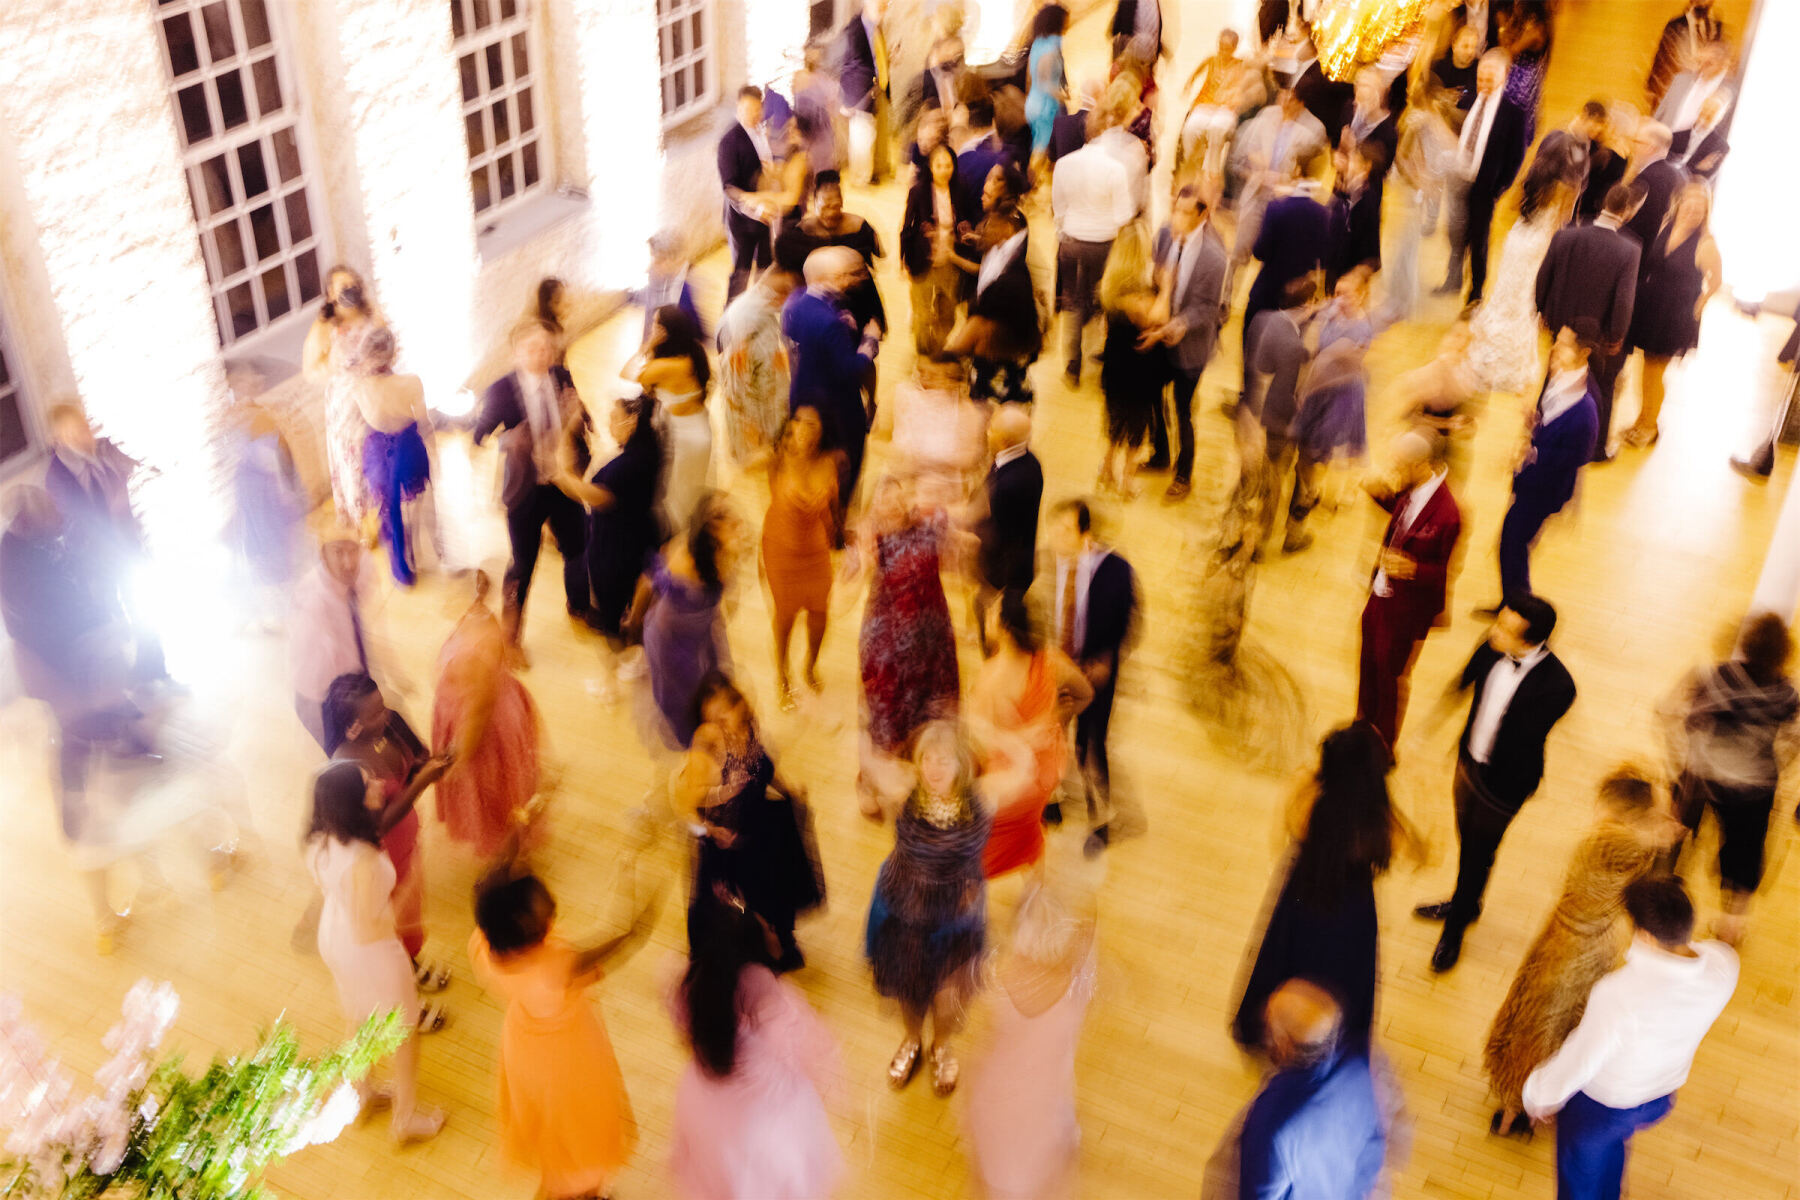 All of the guests at the art museum wedding danced as a DJ spun music.